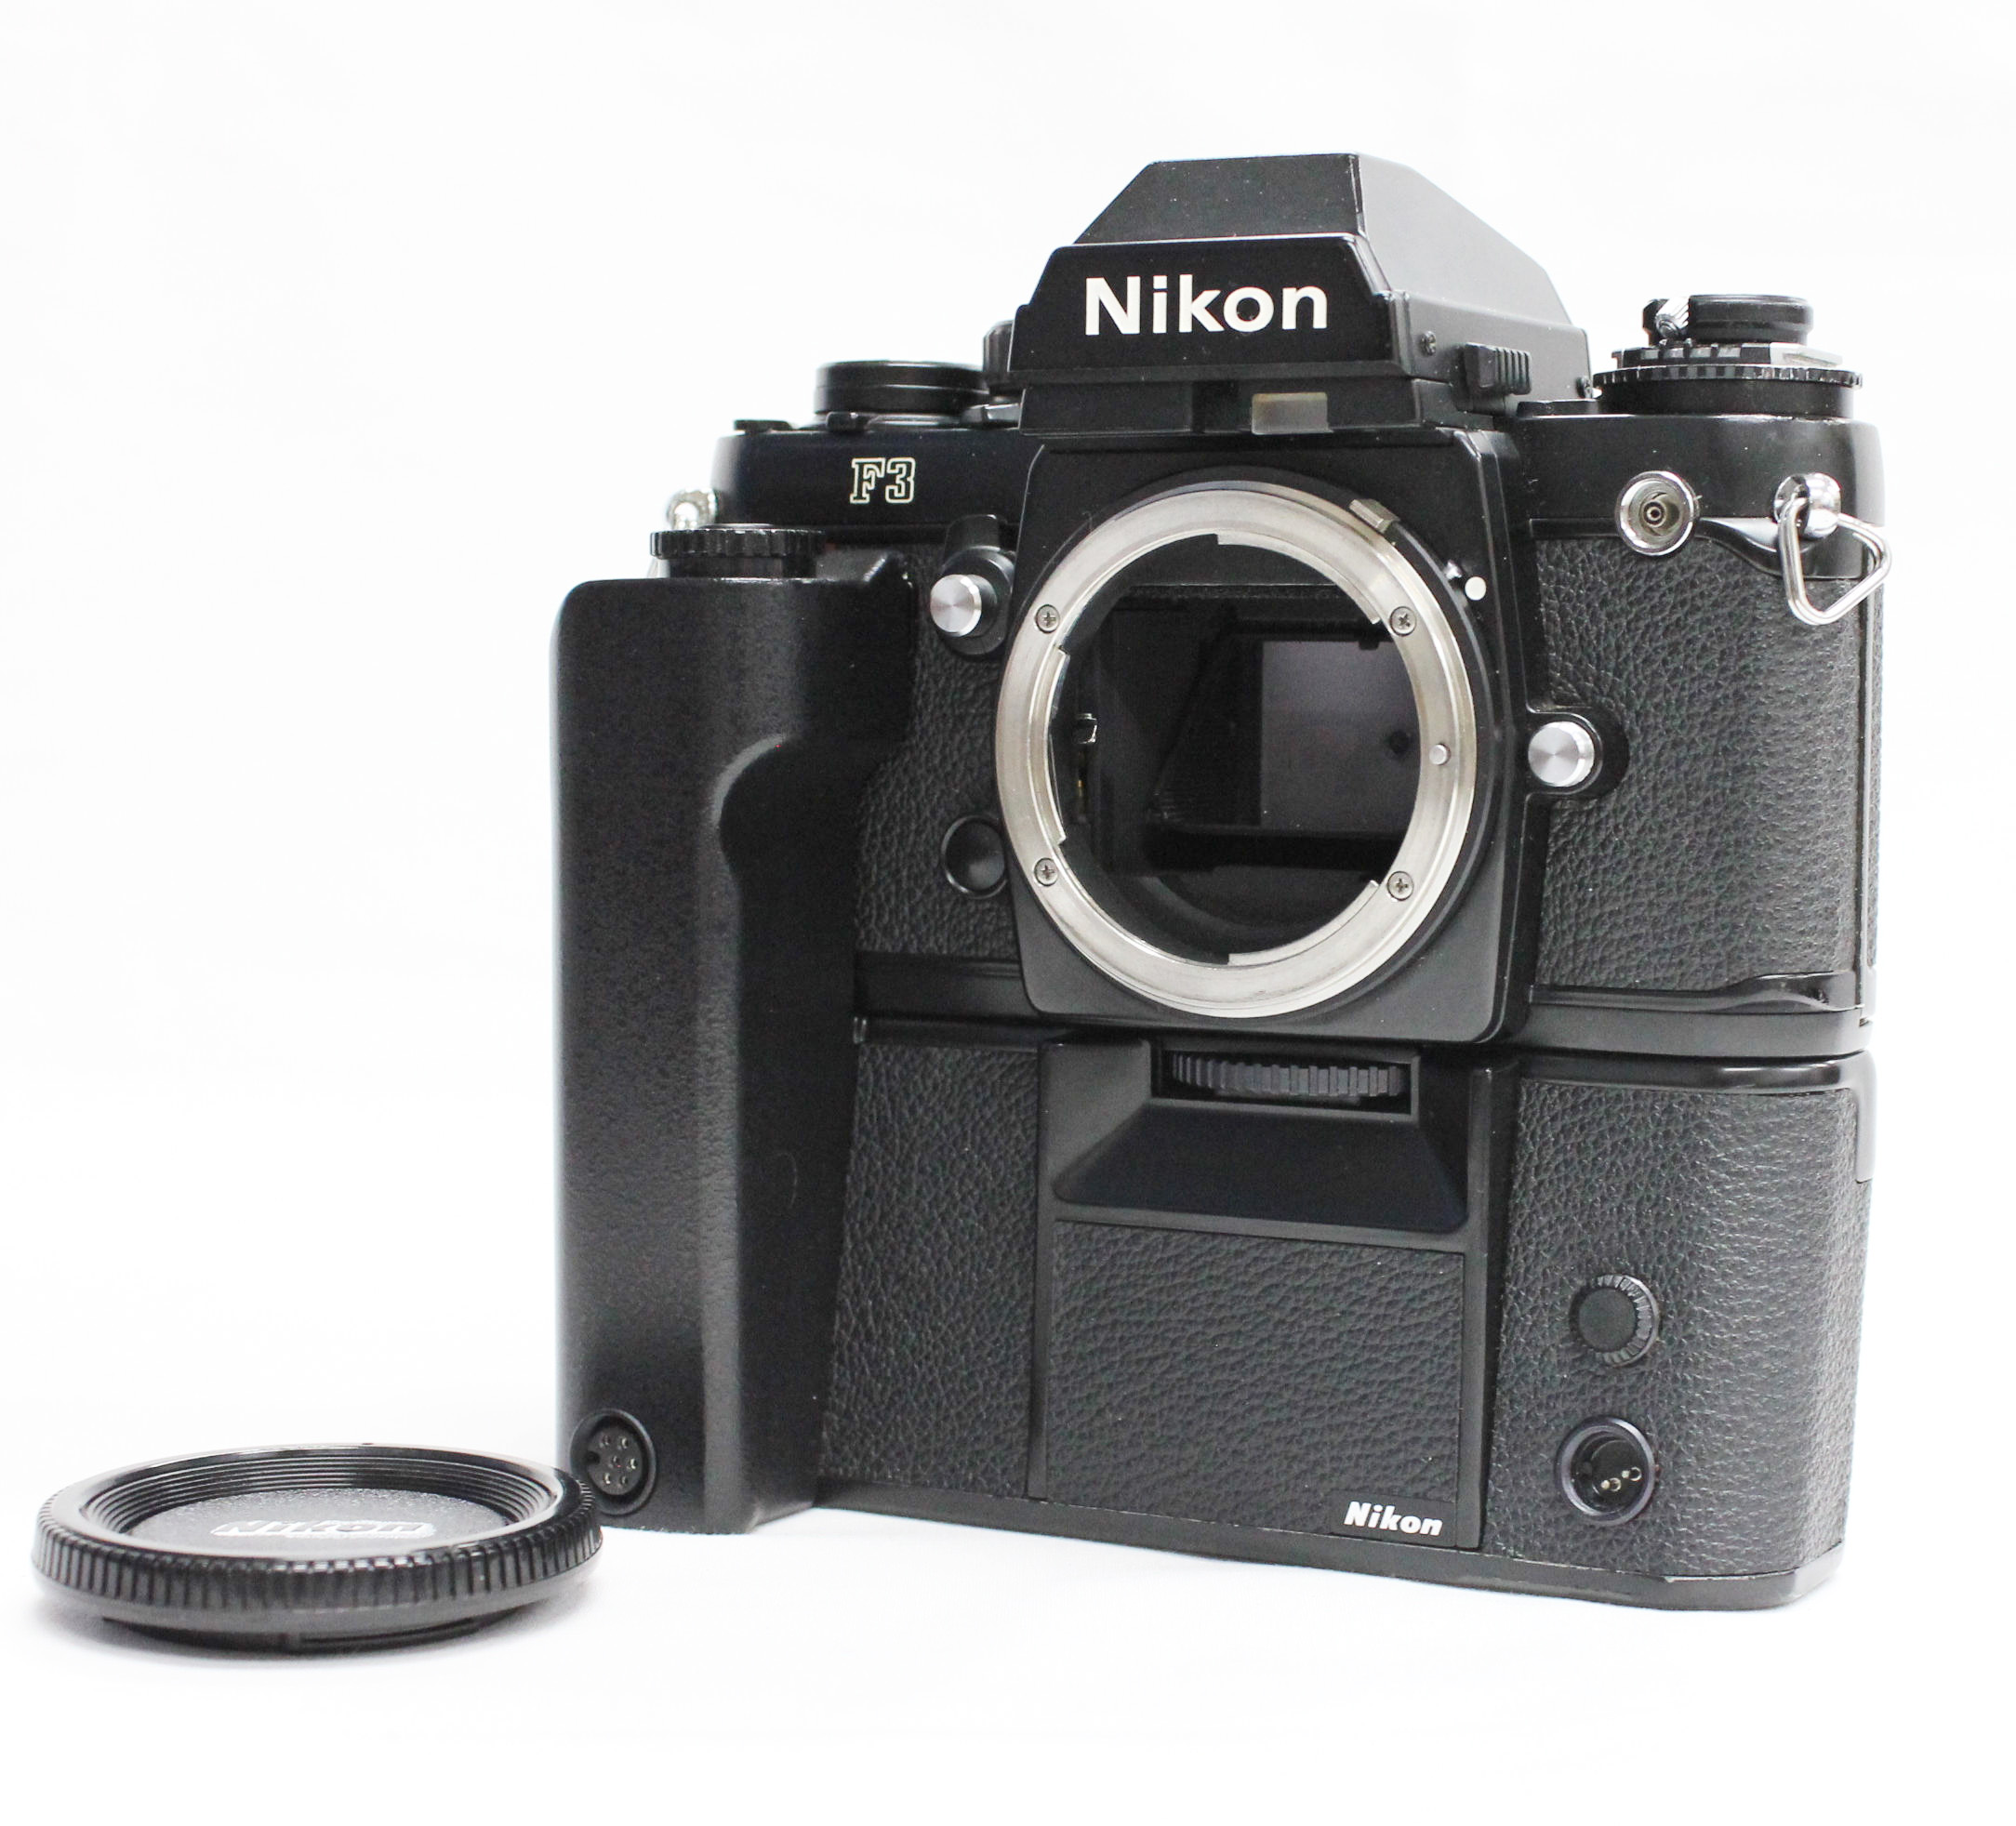 [Excellent +++++] Nikon F3 35mm SLR Film Camera Body with Motor Drive MD-4 from Japan